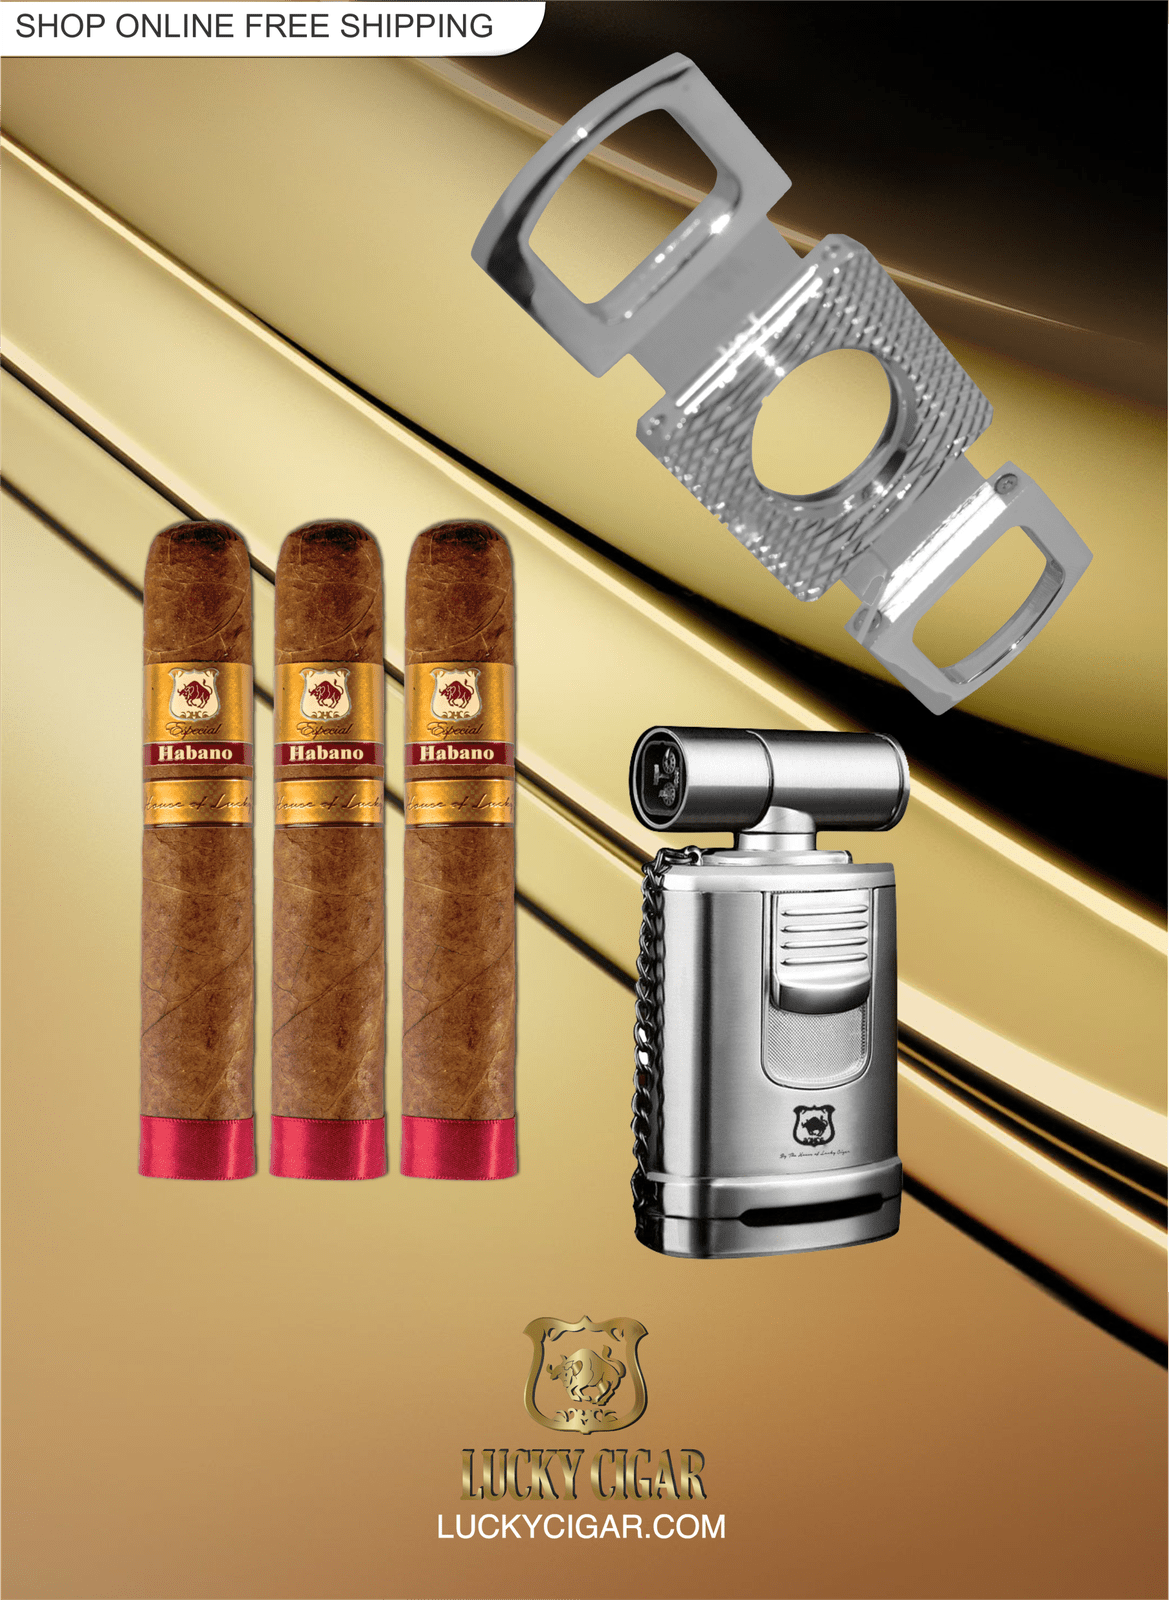 Lucky Cigar Sampler Sets: Set of 3 Especial Habano Robusto Cigars with Table Torch, Cutter